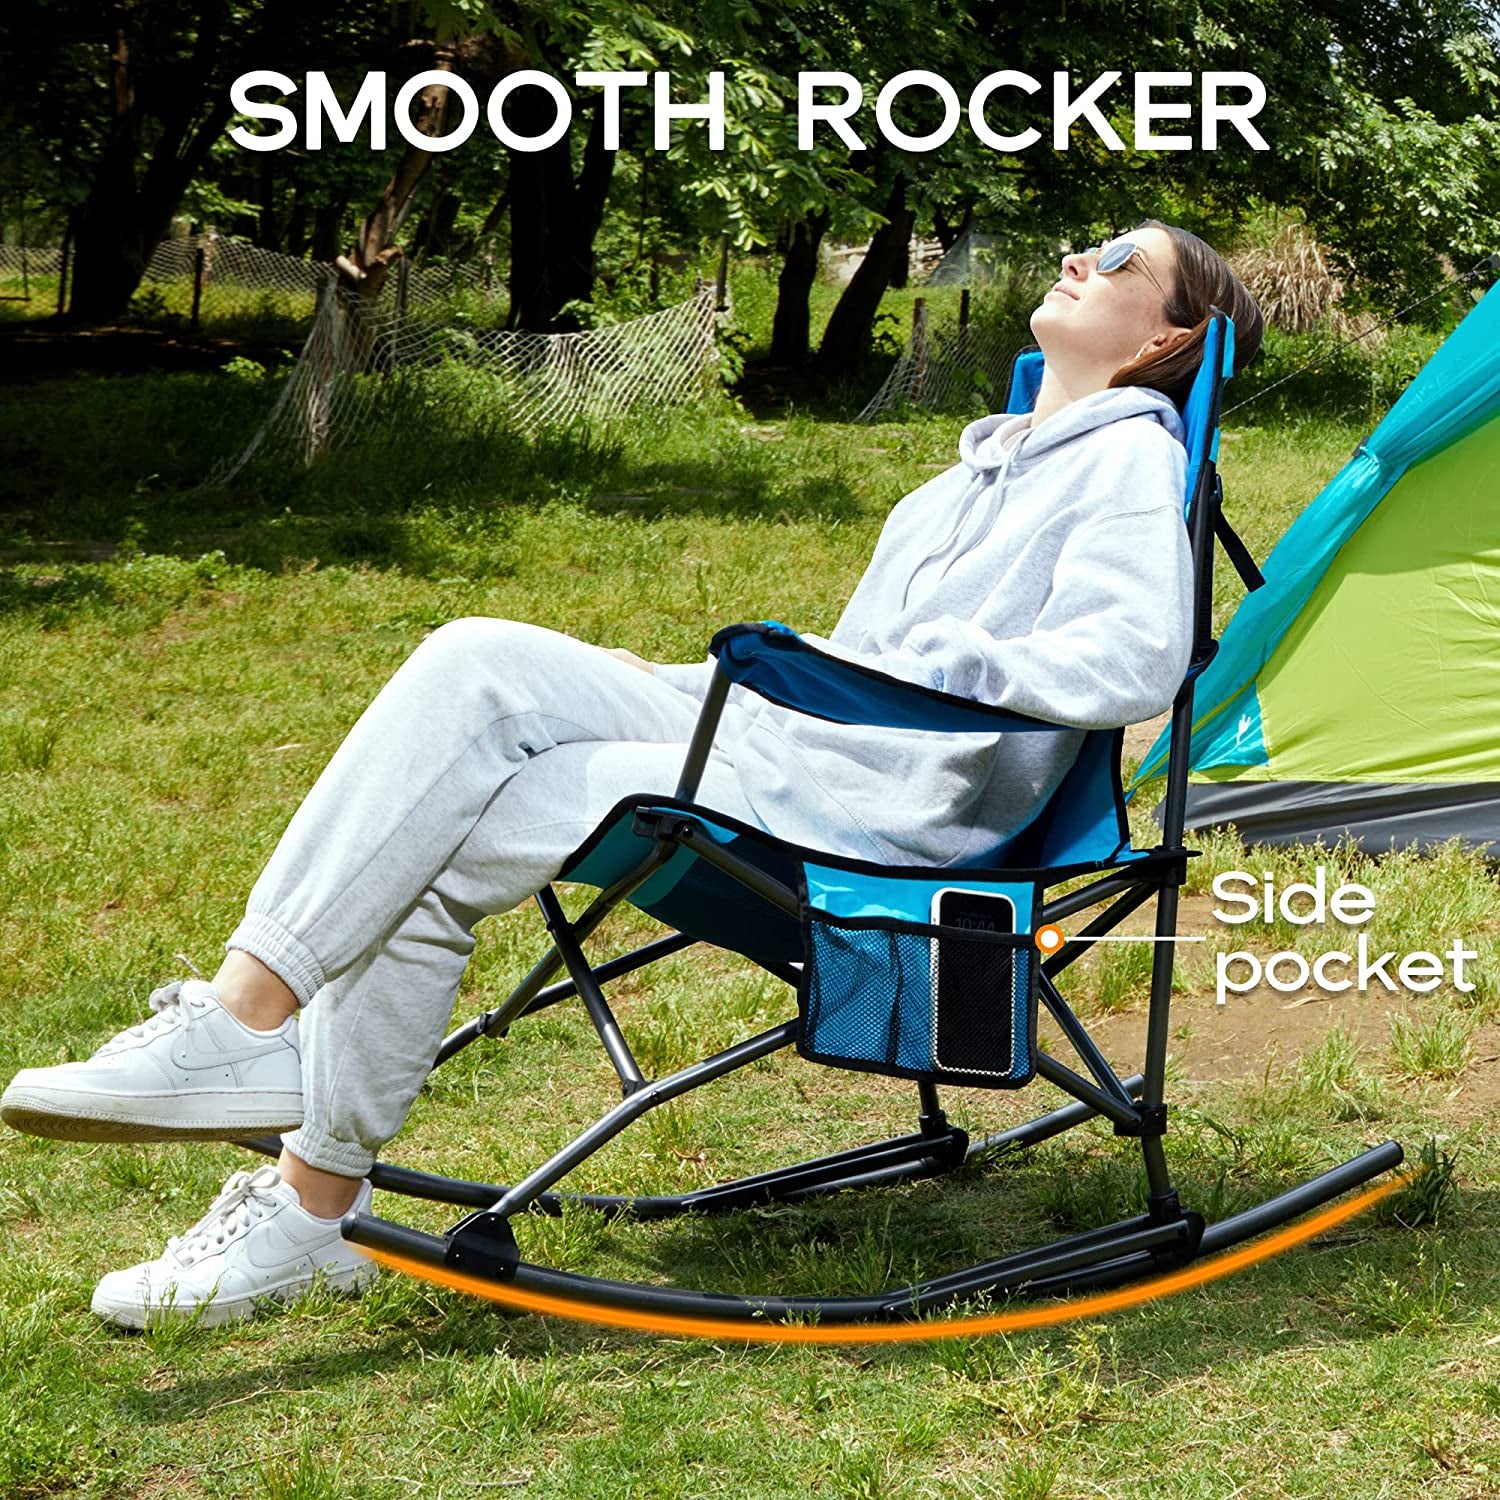 Portable Folding Outdoor Rocking Chair with High Back, Cup Holder, Side Pocket, and Carry Bag - Supports up to 300 lbs (Blue)